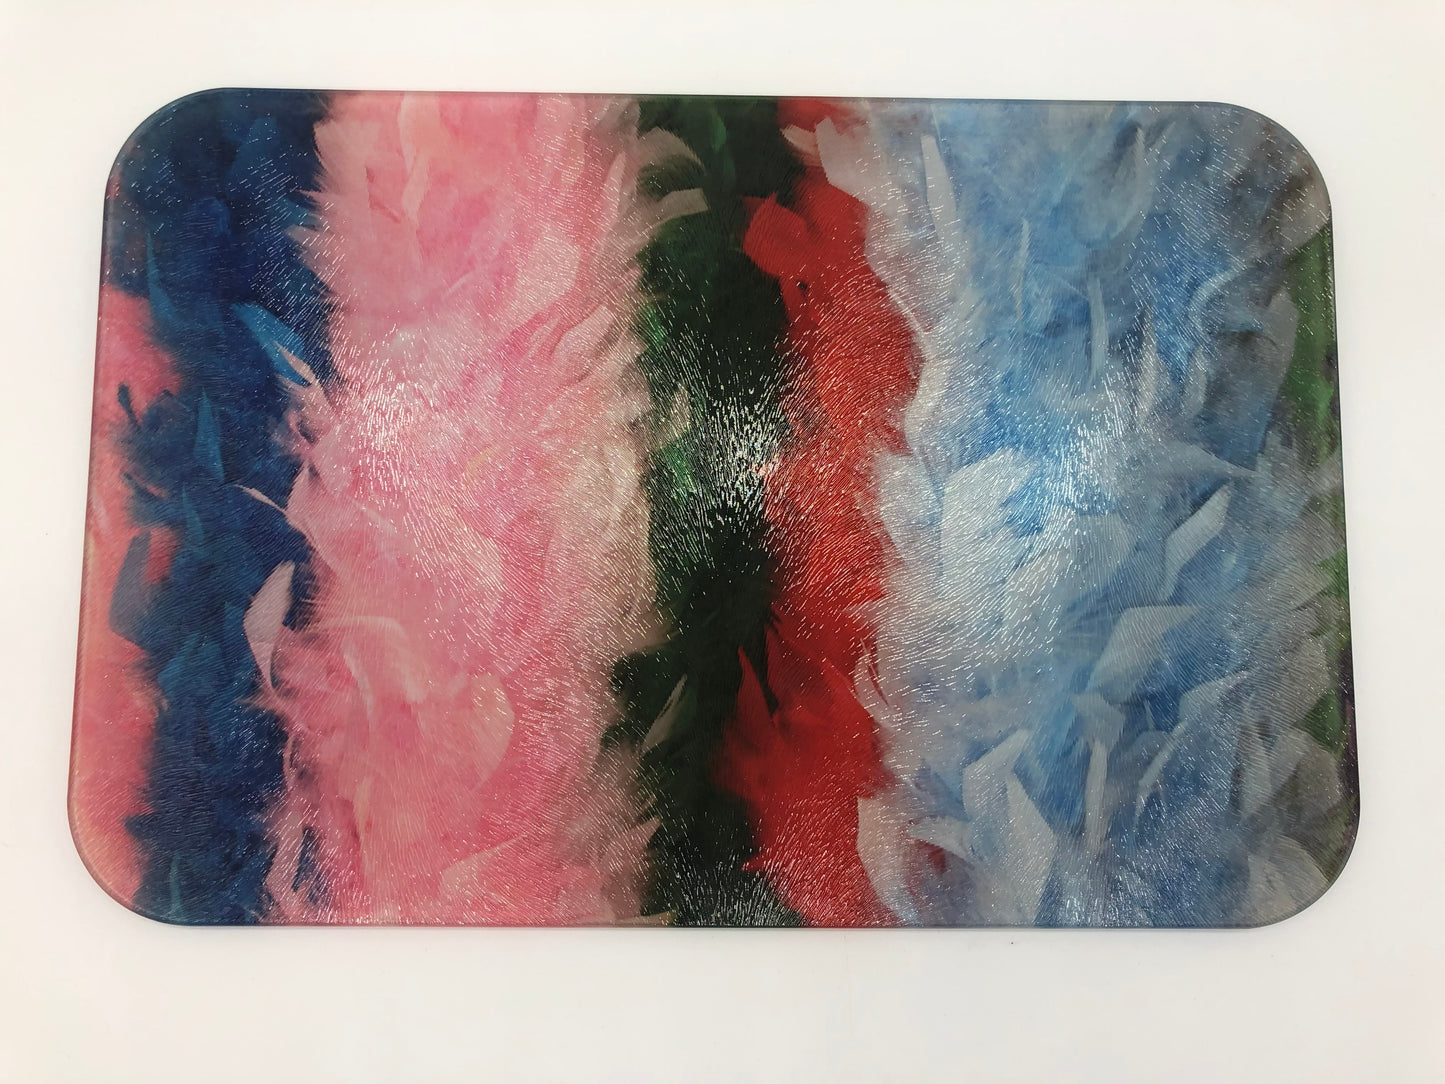 Rectangular glass cutting board with dark blue, pink, green, red, and light blue feather boas